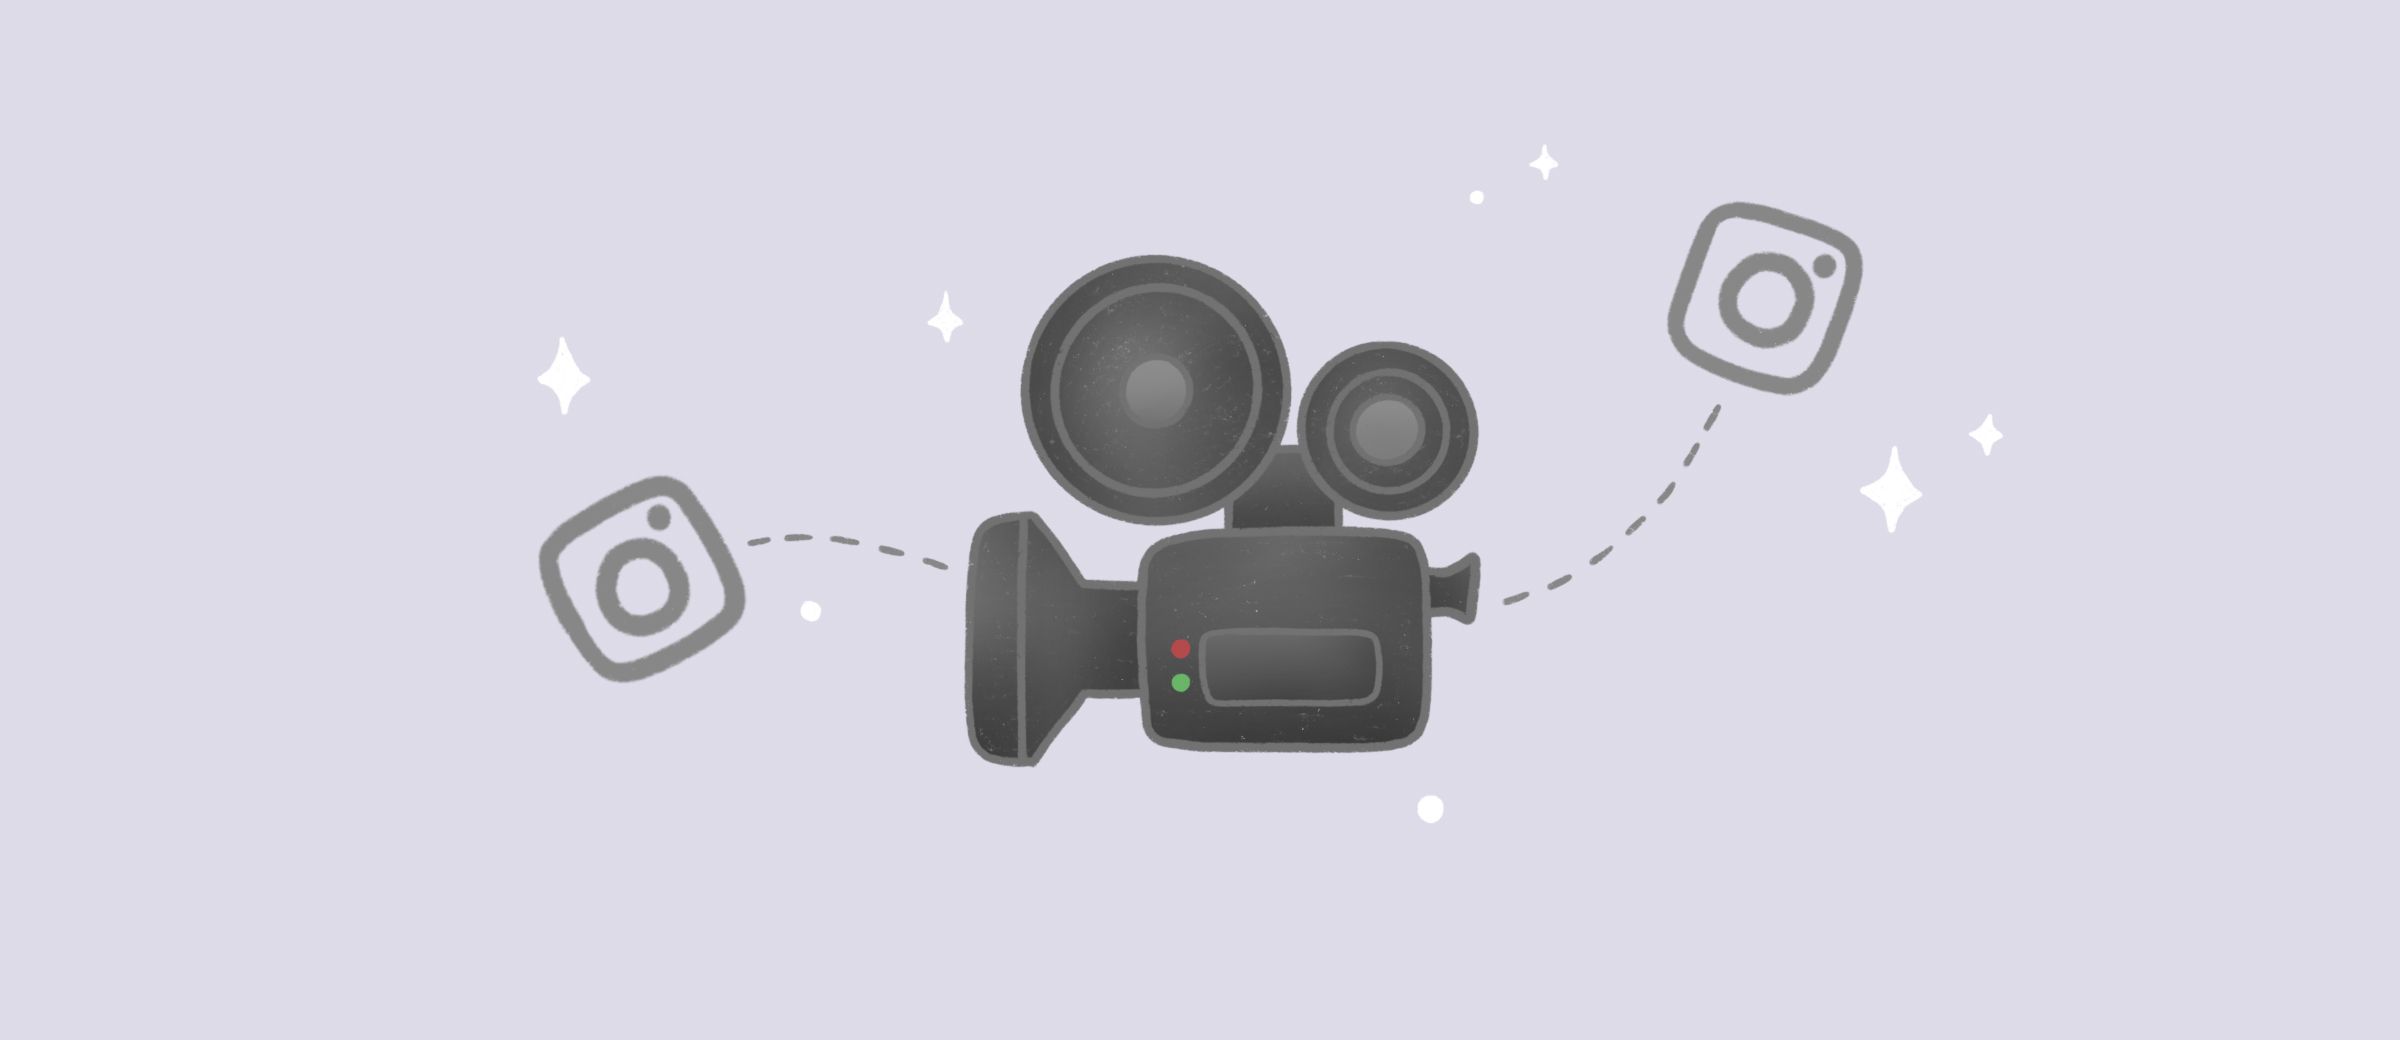 5 Tips on Improving Video Quality, by allie-teegardin